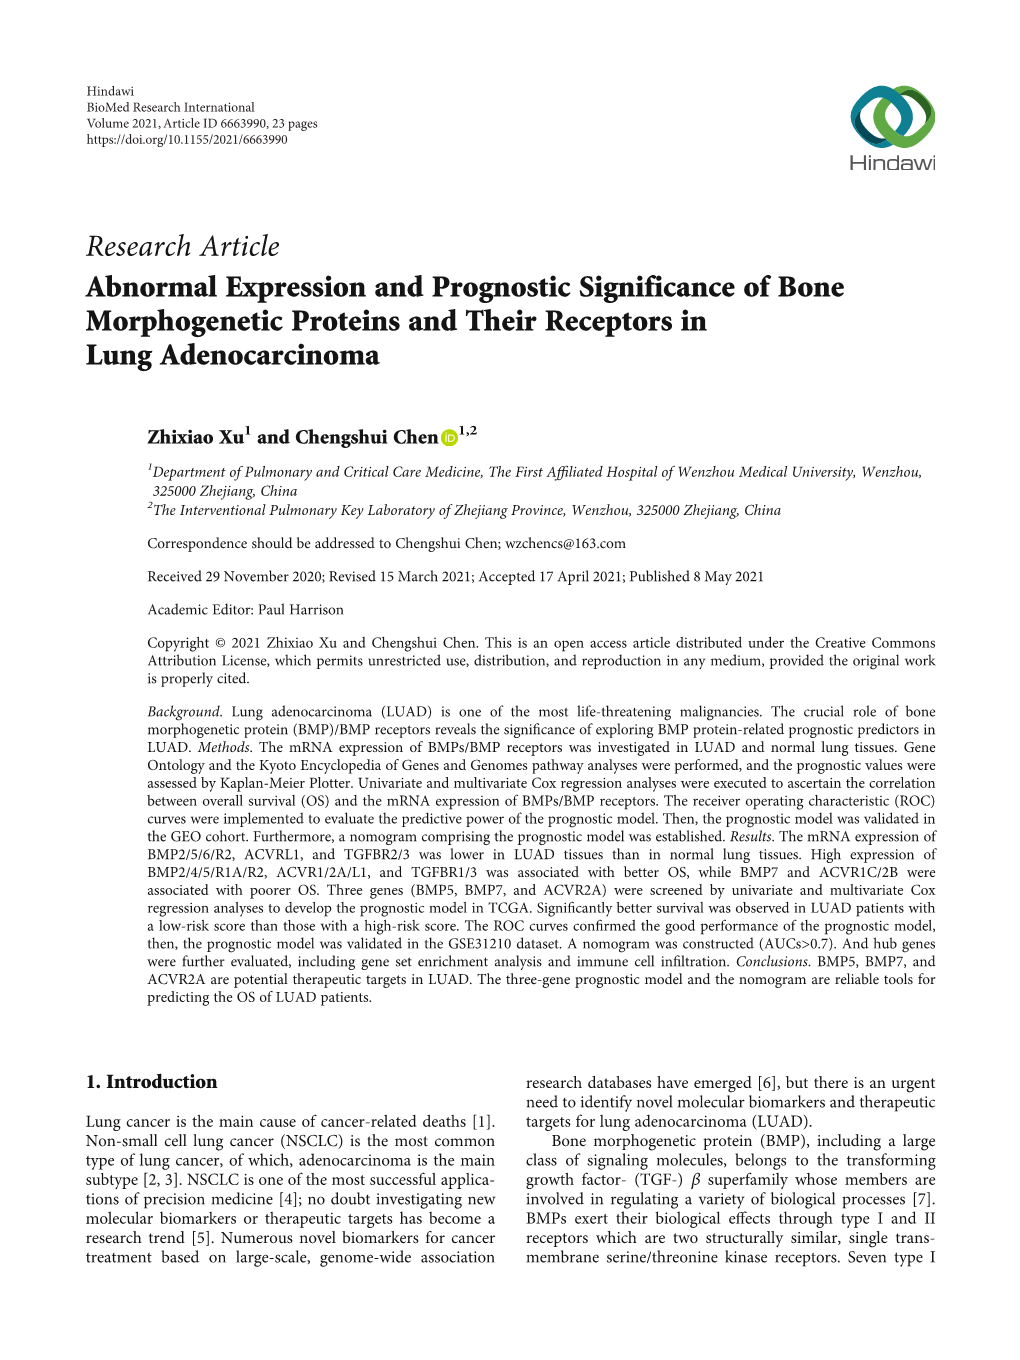 Abnormal Expression and Prognostic Significance of Bone Morphogenetic Proteins and Their Receptors in Lung Adenocarcinoma